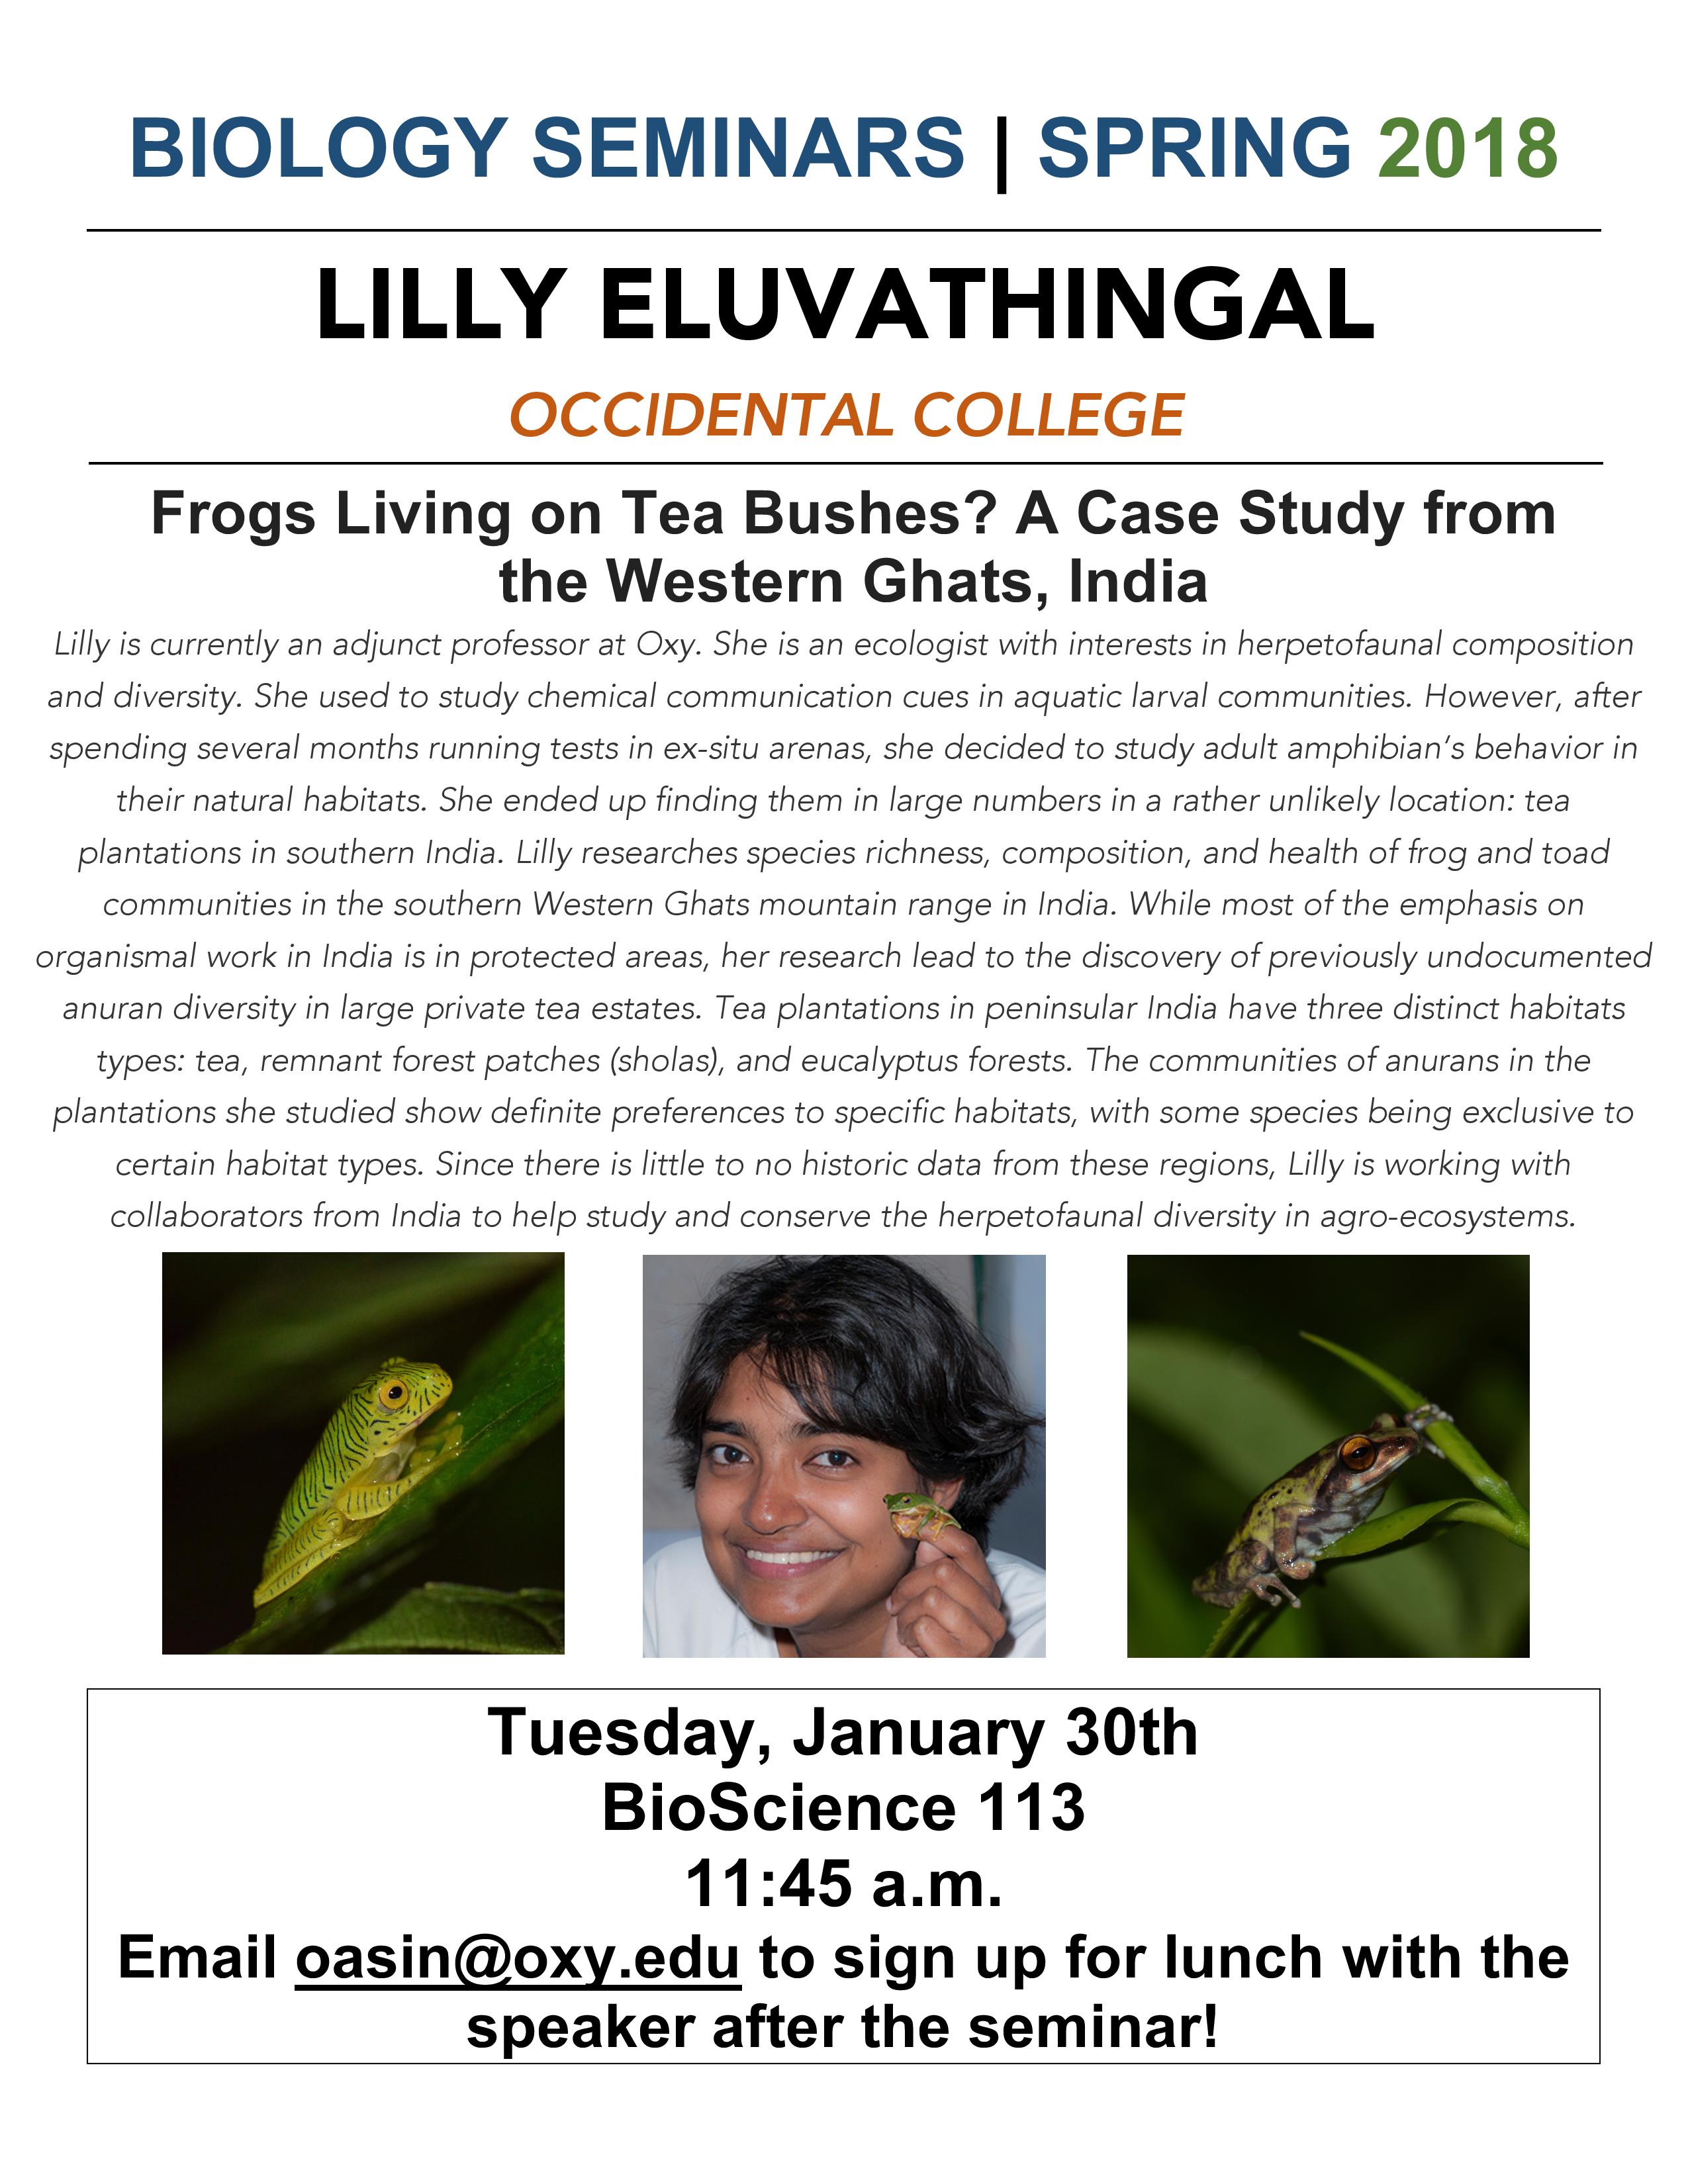 Image for Lilly Eluvathingal: Frogs Living on Tea Bushes? A 